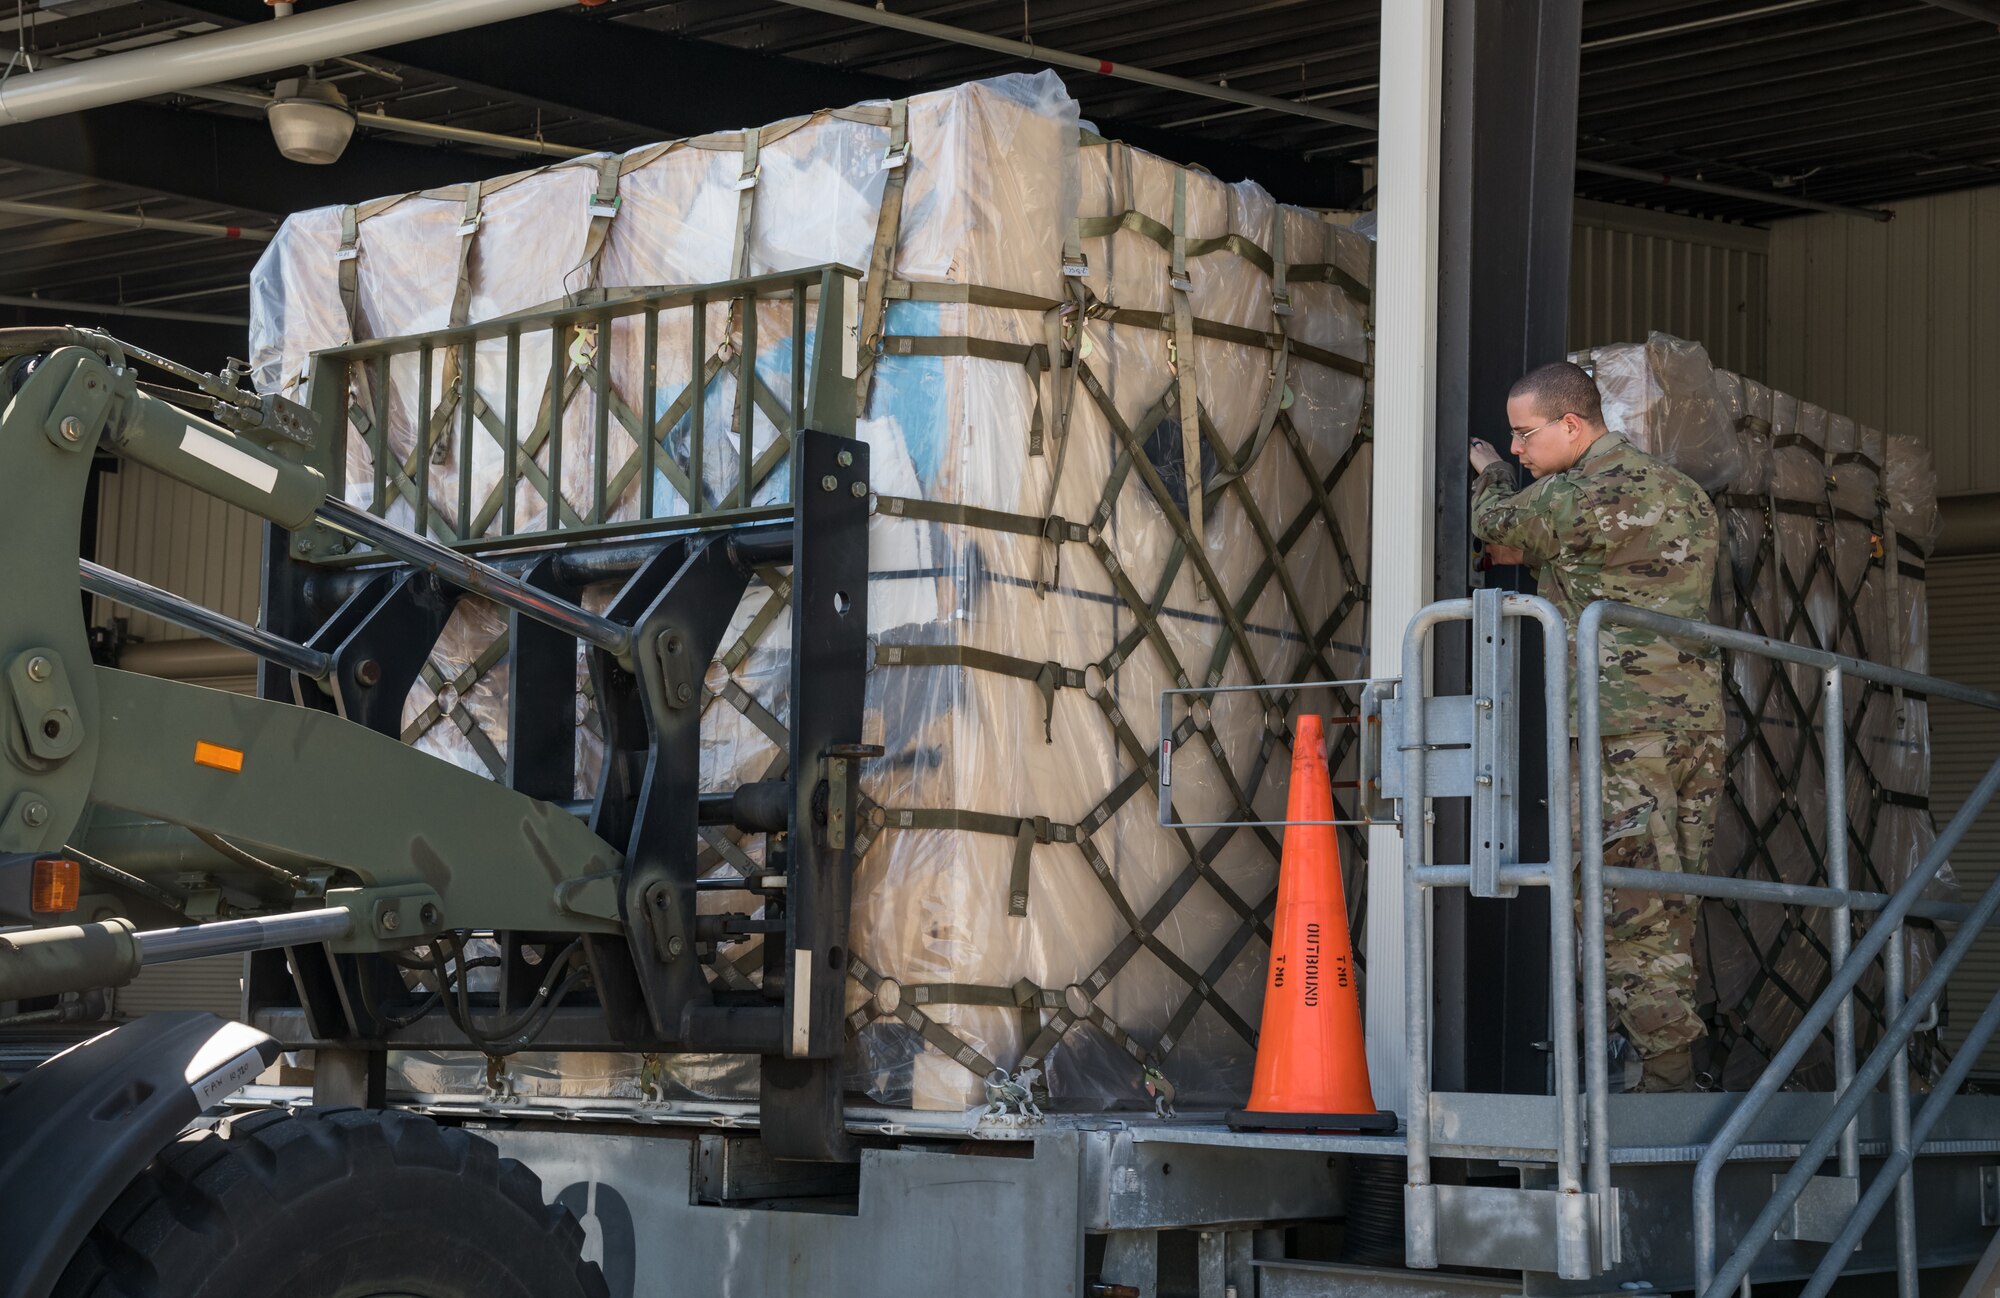 Airman 1st Class Emmanuel Arroyo, 436th Aerial Port Squadron traffic management office, marshals a 10K all-terrain forklift driven by Eric Banks, 436th APS, as they load a pallet onto a trailer March 26, 2020, at Dover Air Force Base, Delaware. Arroyo and Banks loaded numerous pallets onto the trailer as required airlift operations continued during the evolving COVID-19 pandemic. (U.S. Air Force photo by Roland Balik)